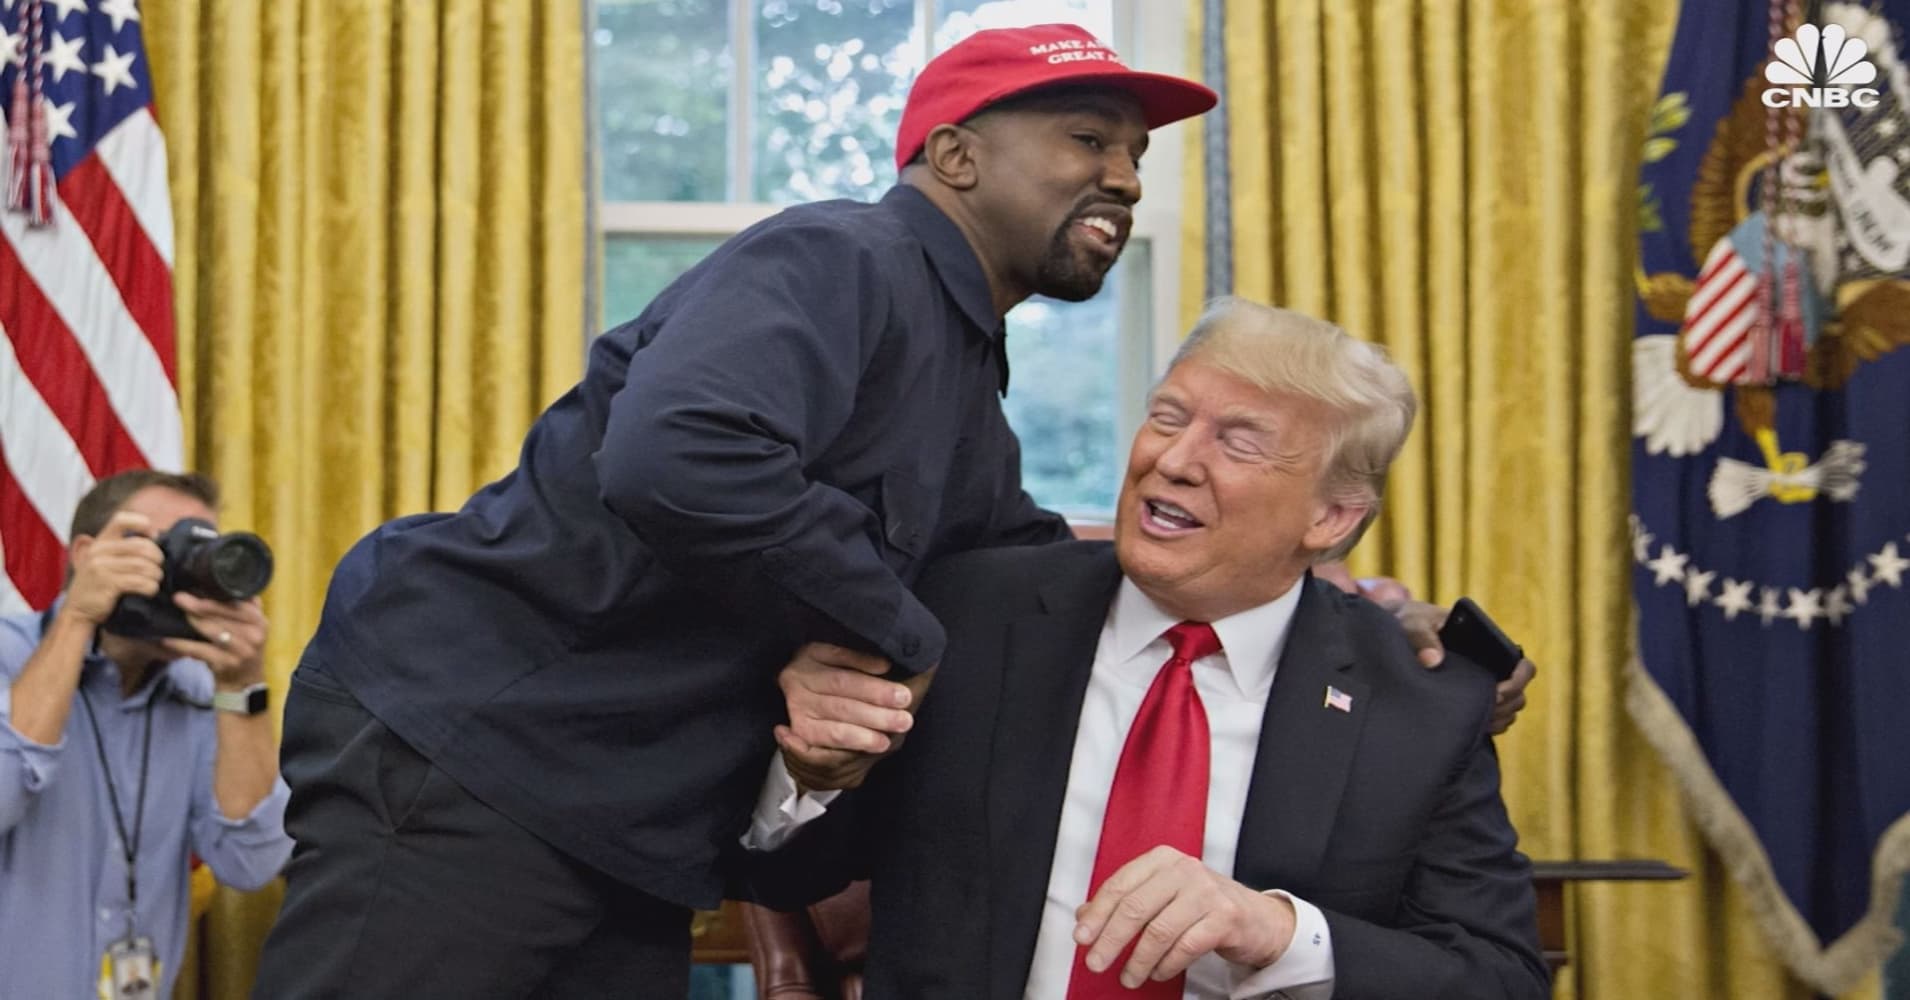 Kanye West with Donald Trump